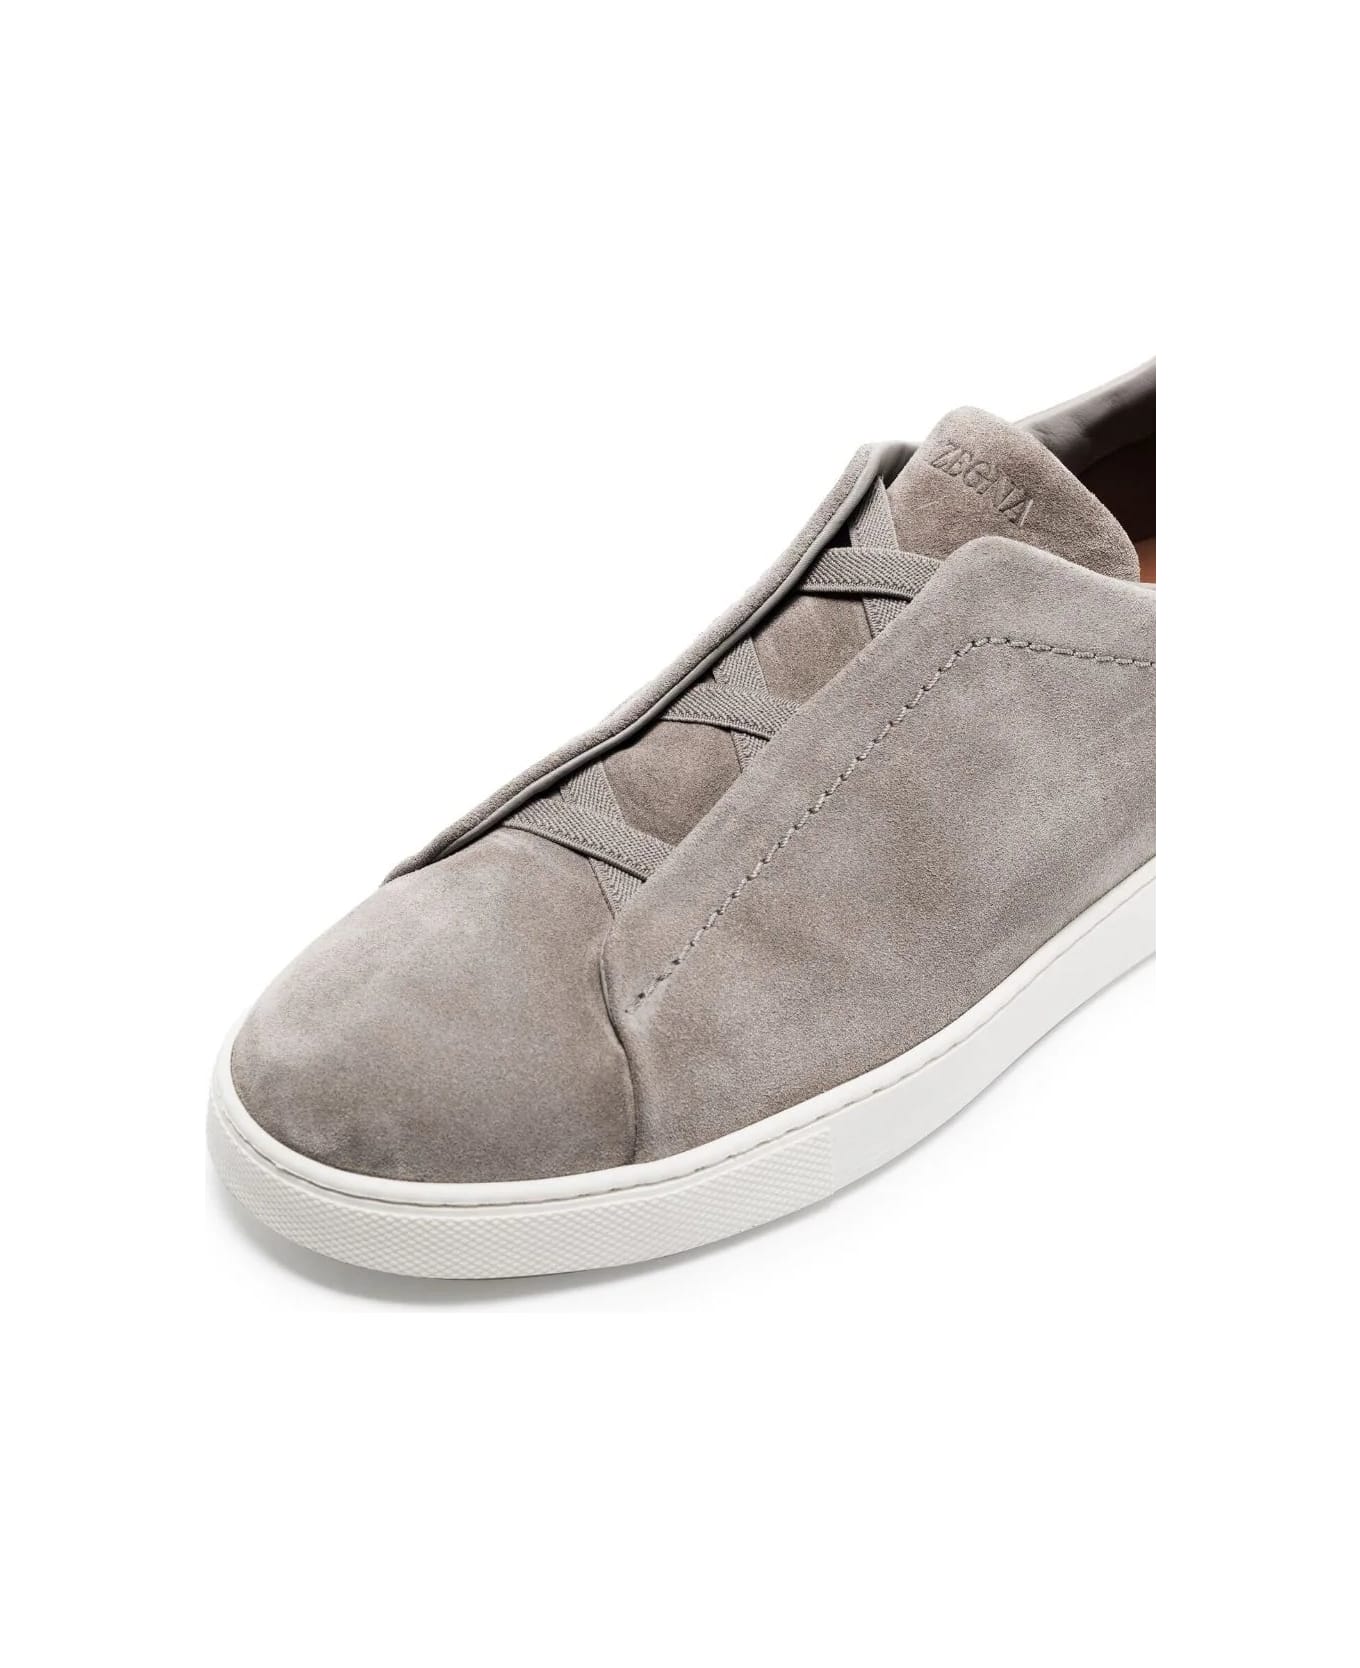 Zegna Triple Stitch Sneakers In Grey Suede - Grey